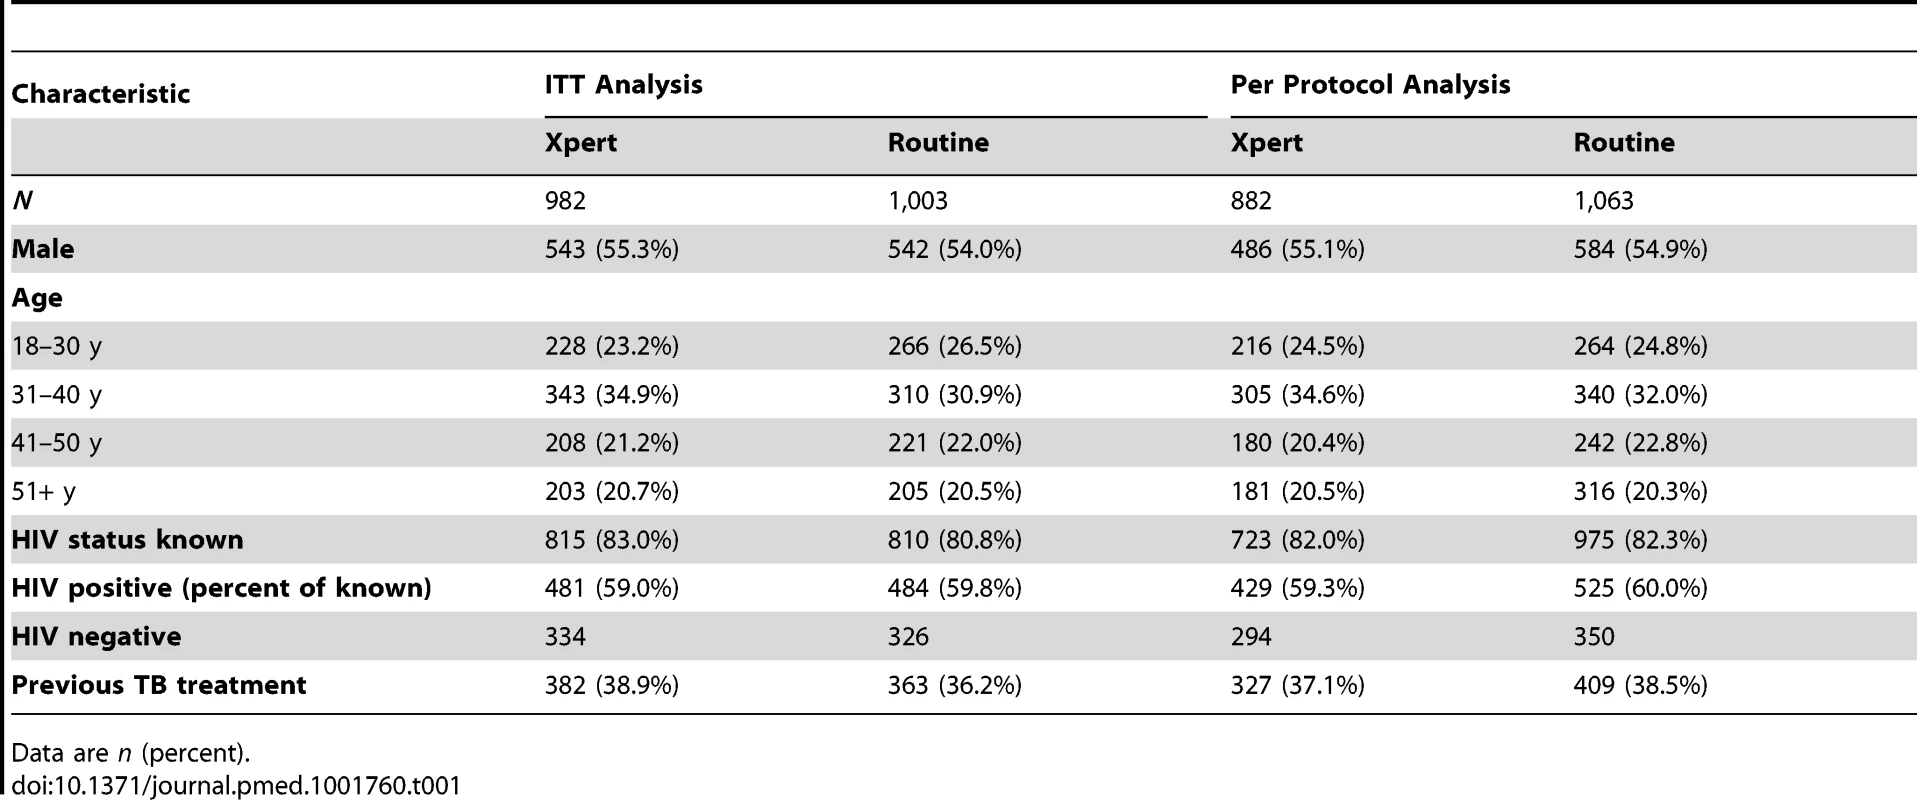 Clinical and demographic characteristics of participants by study arm for both the ITT and per protocol analyses.